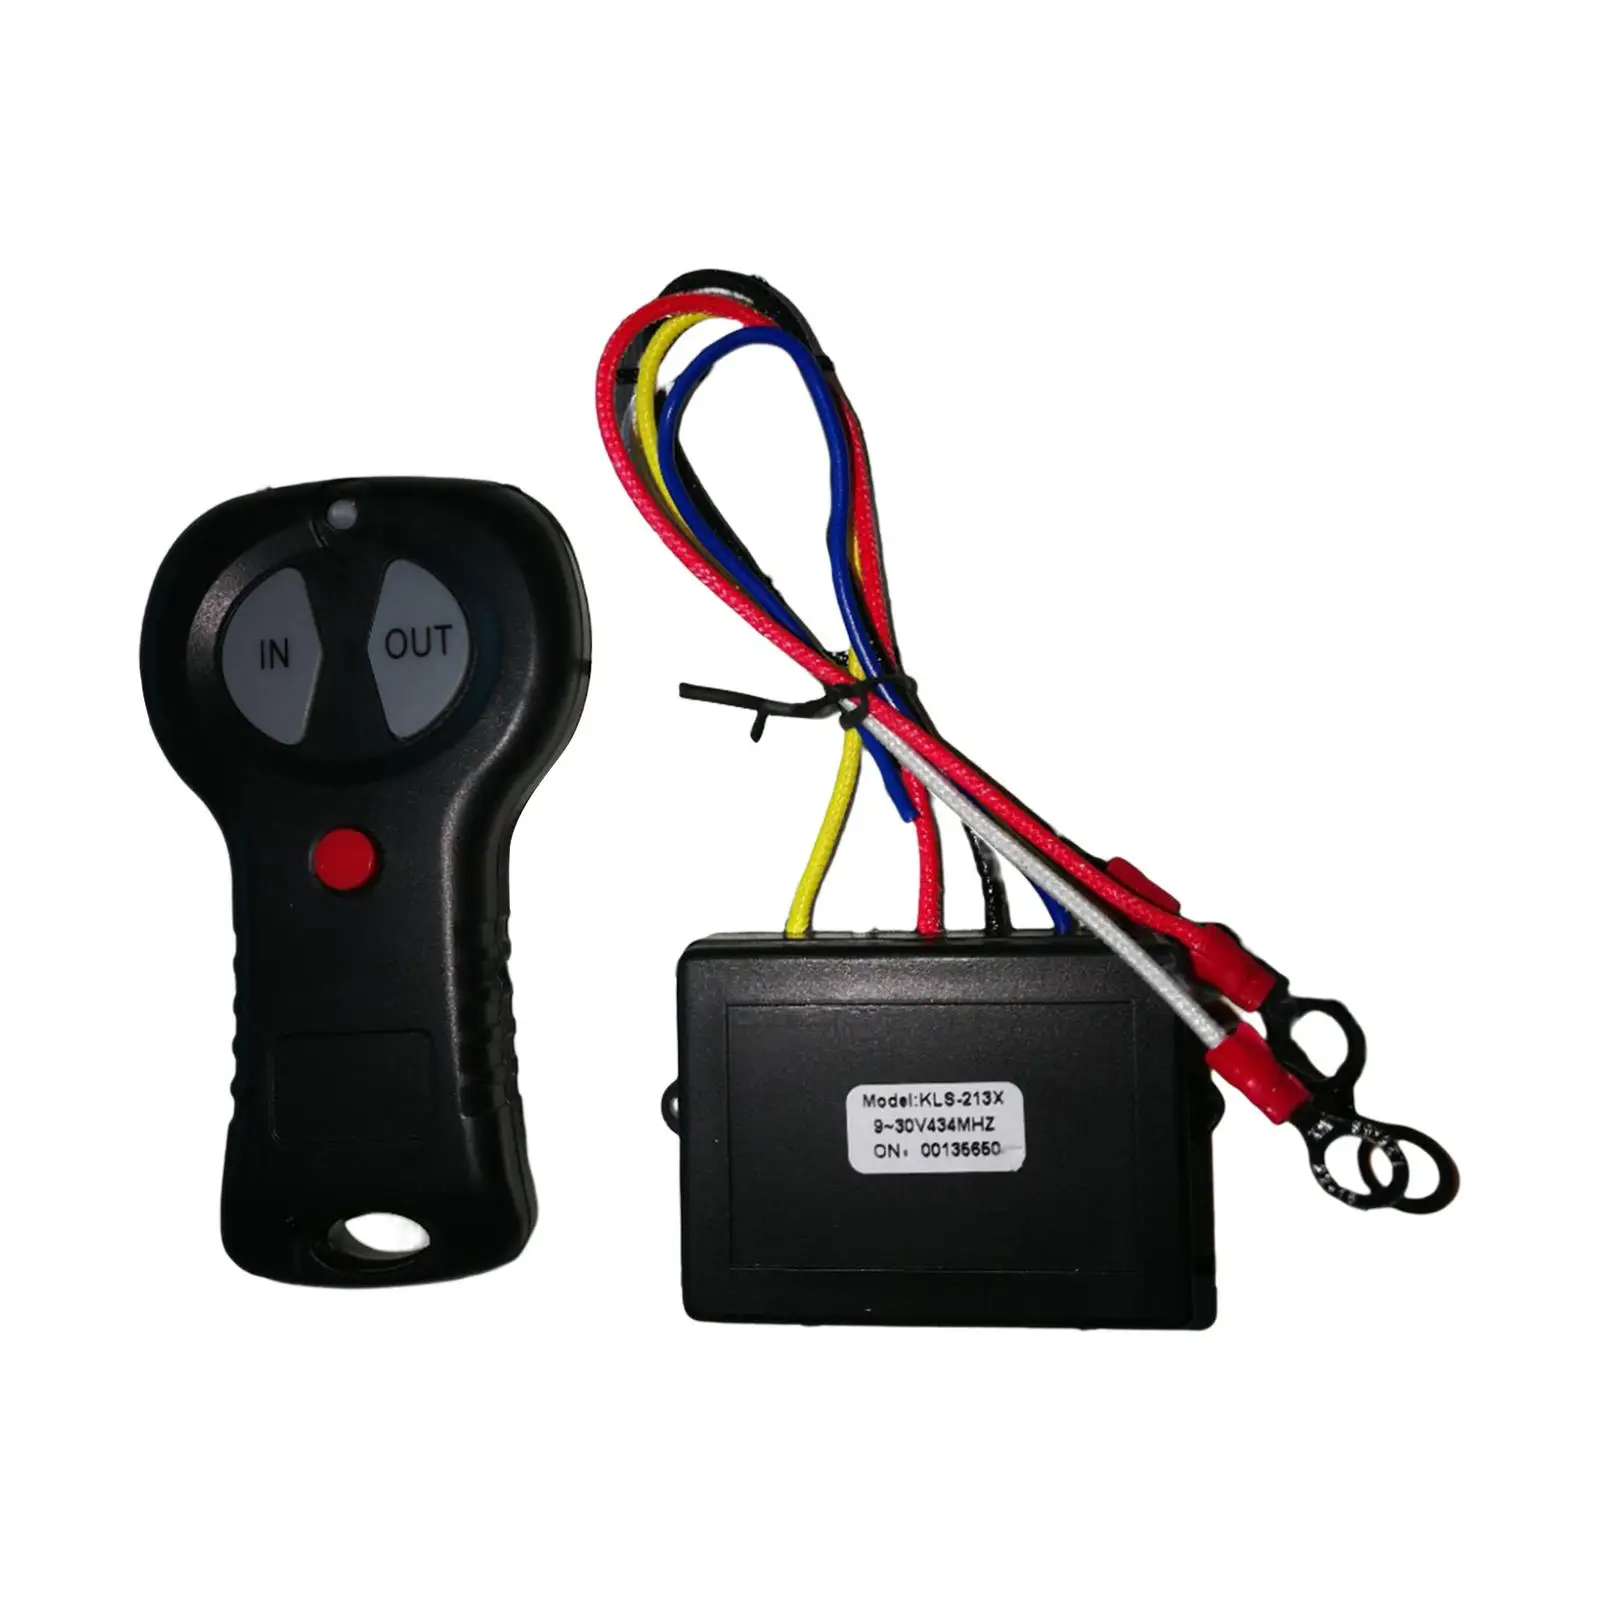 Wireless Winch Remote Control Winch Switches Handset switches easy to Install